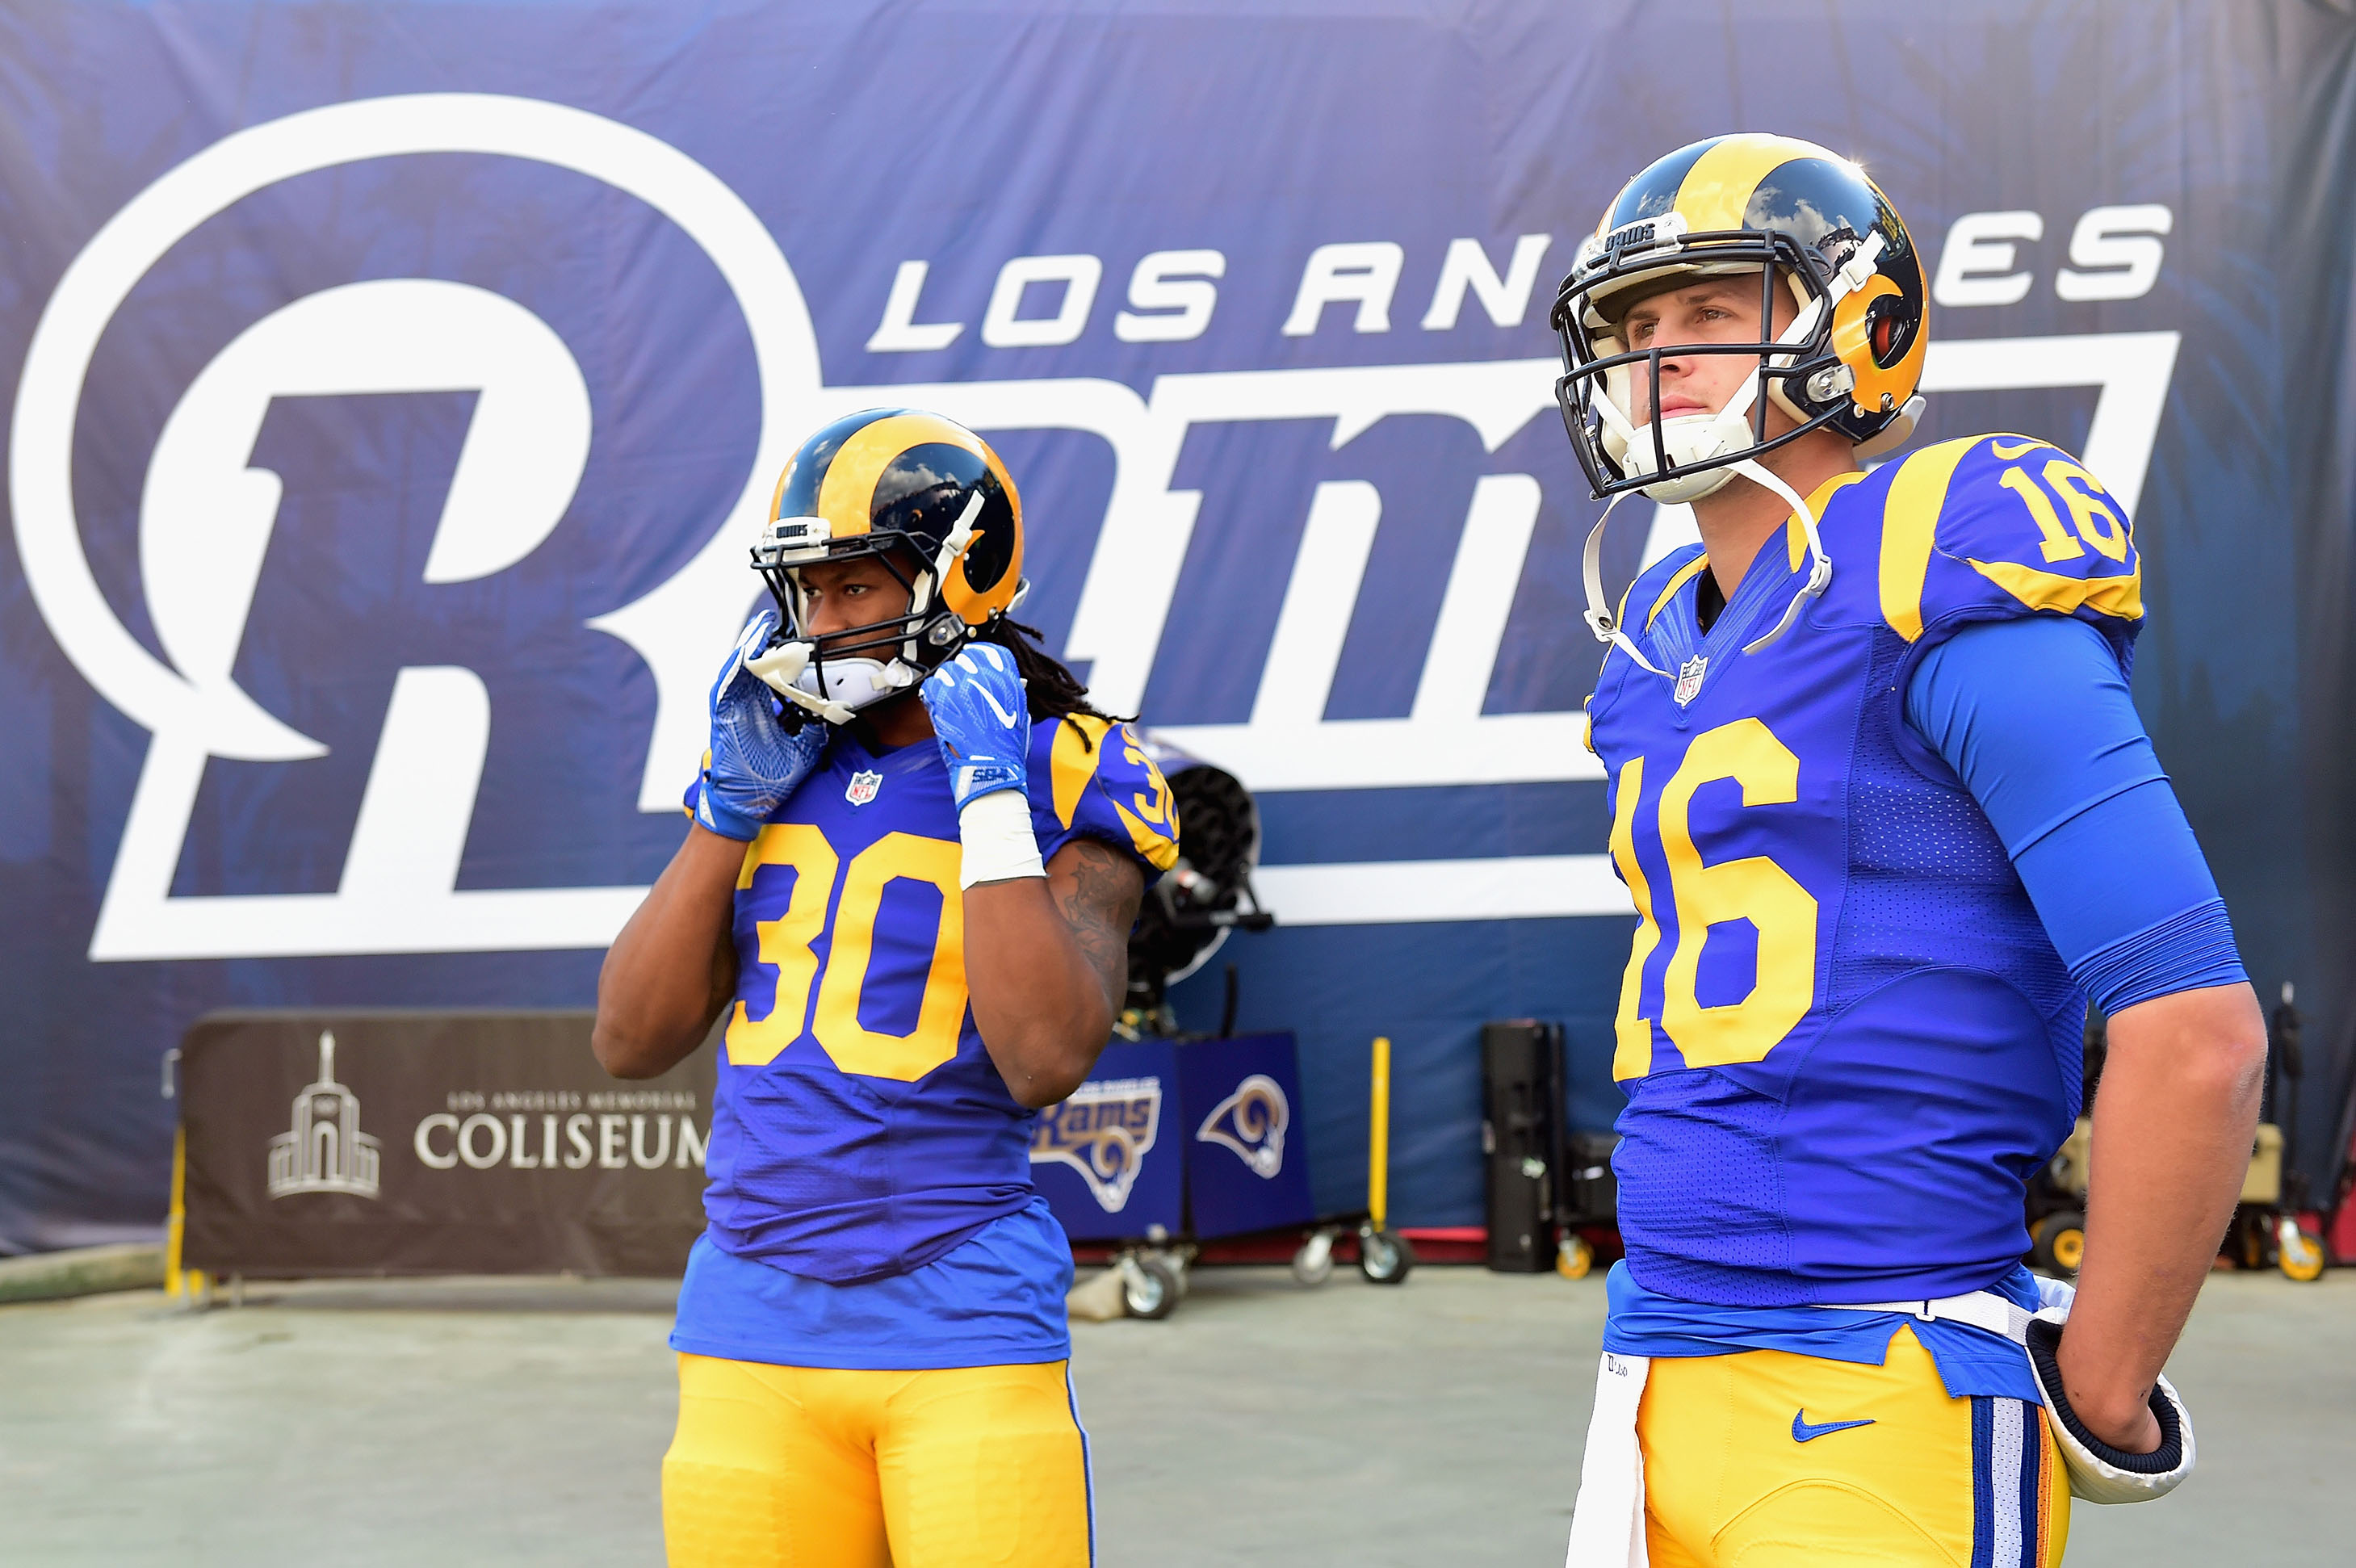 How bad are the Los Angeles Rams' new uniforms? - Quora